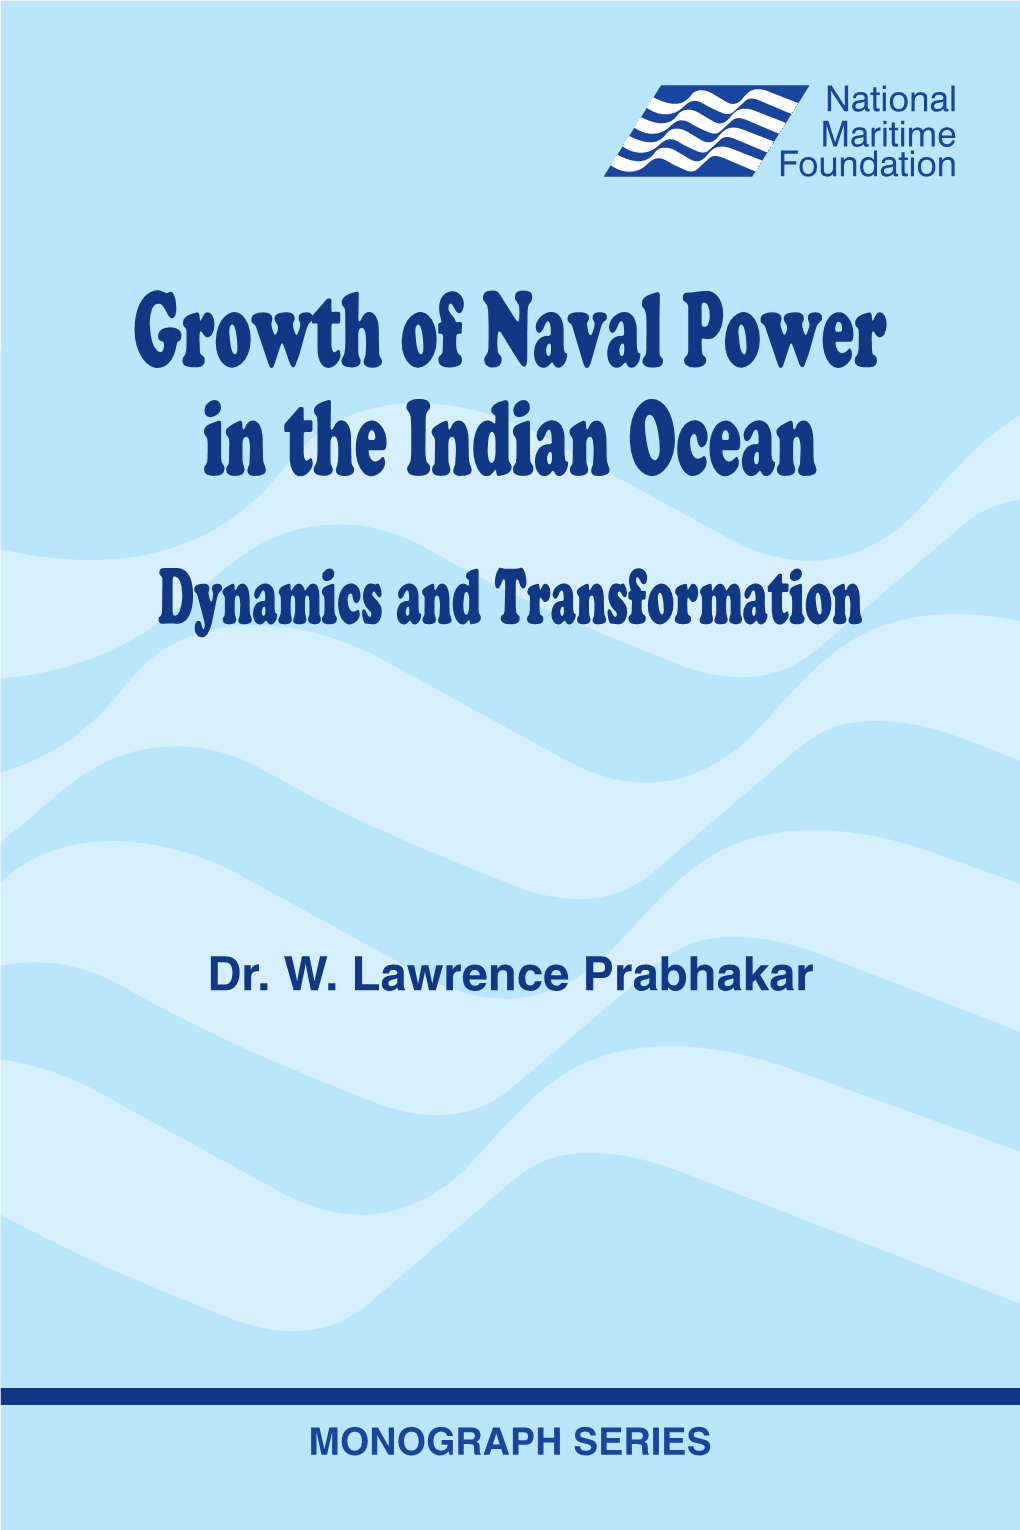 Growth of Naval Power in the Indian Ocean: Dynamics and Transformation